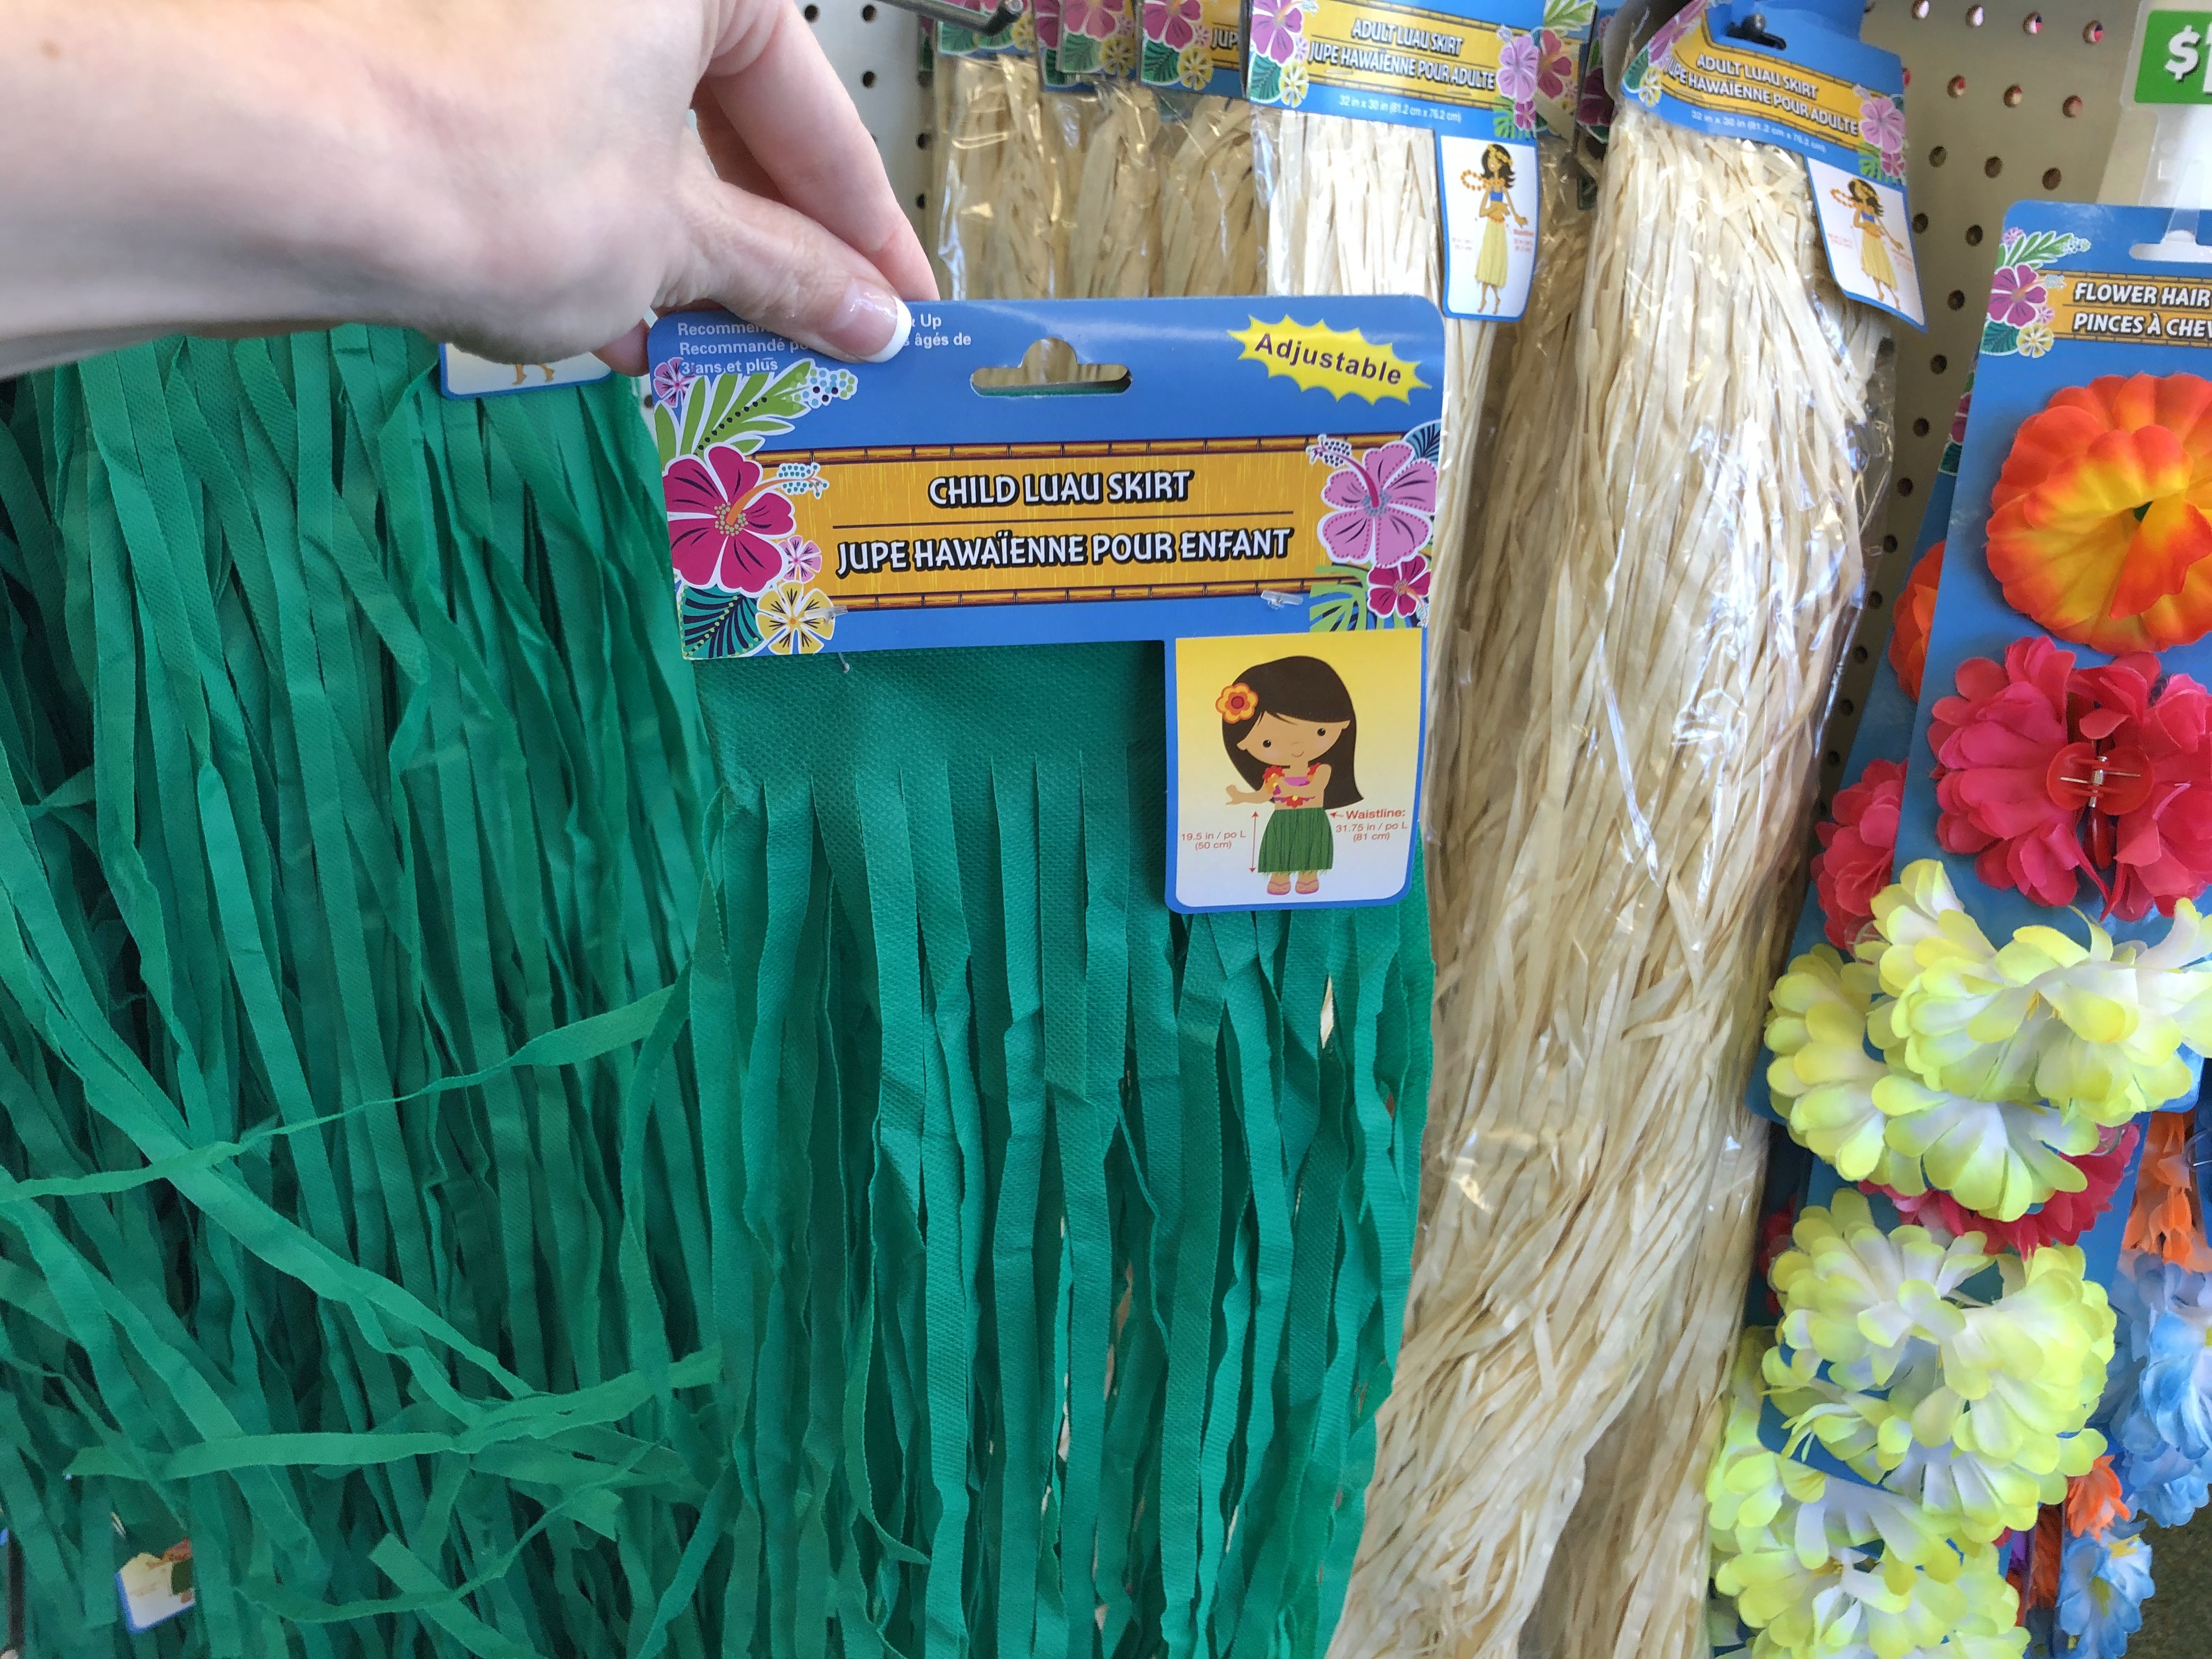 fun-luau-party-items-only-1-at-dollar-tree